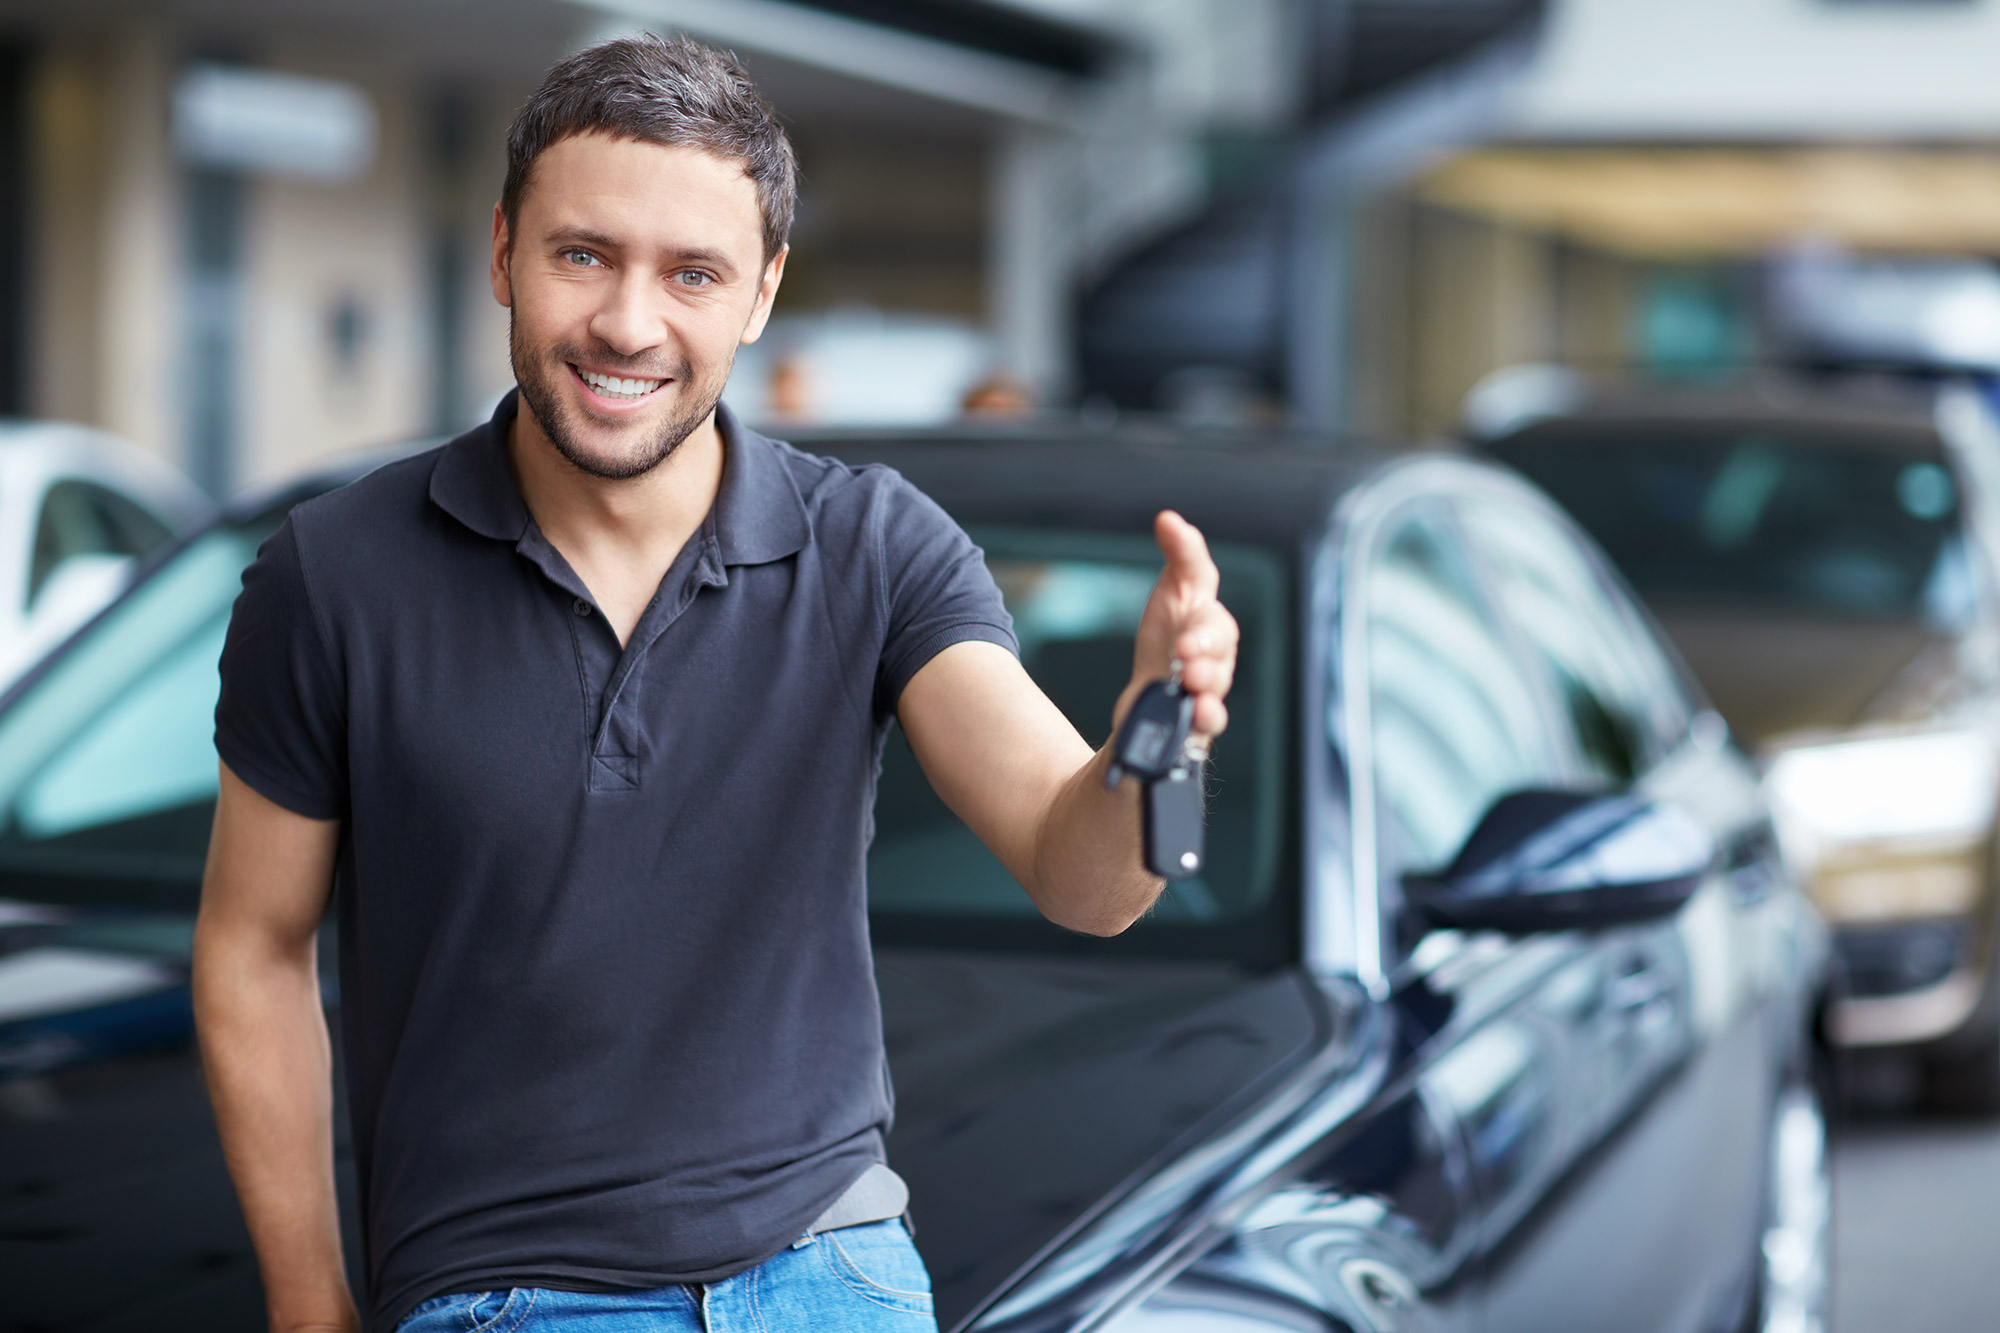 The Top 10 Questions People Ask About Car Leasing